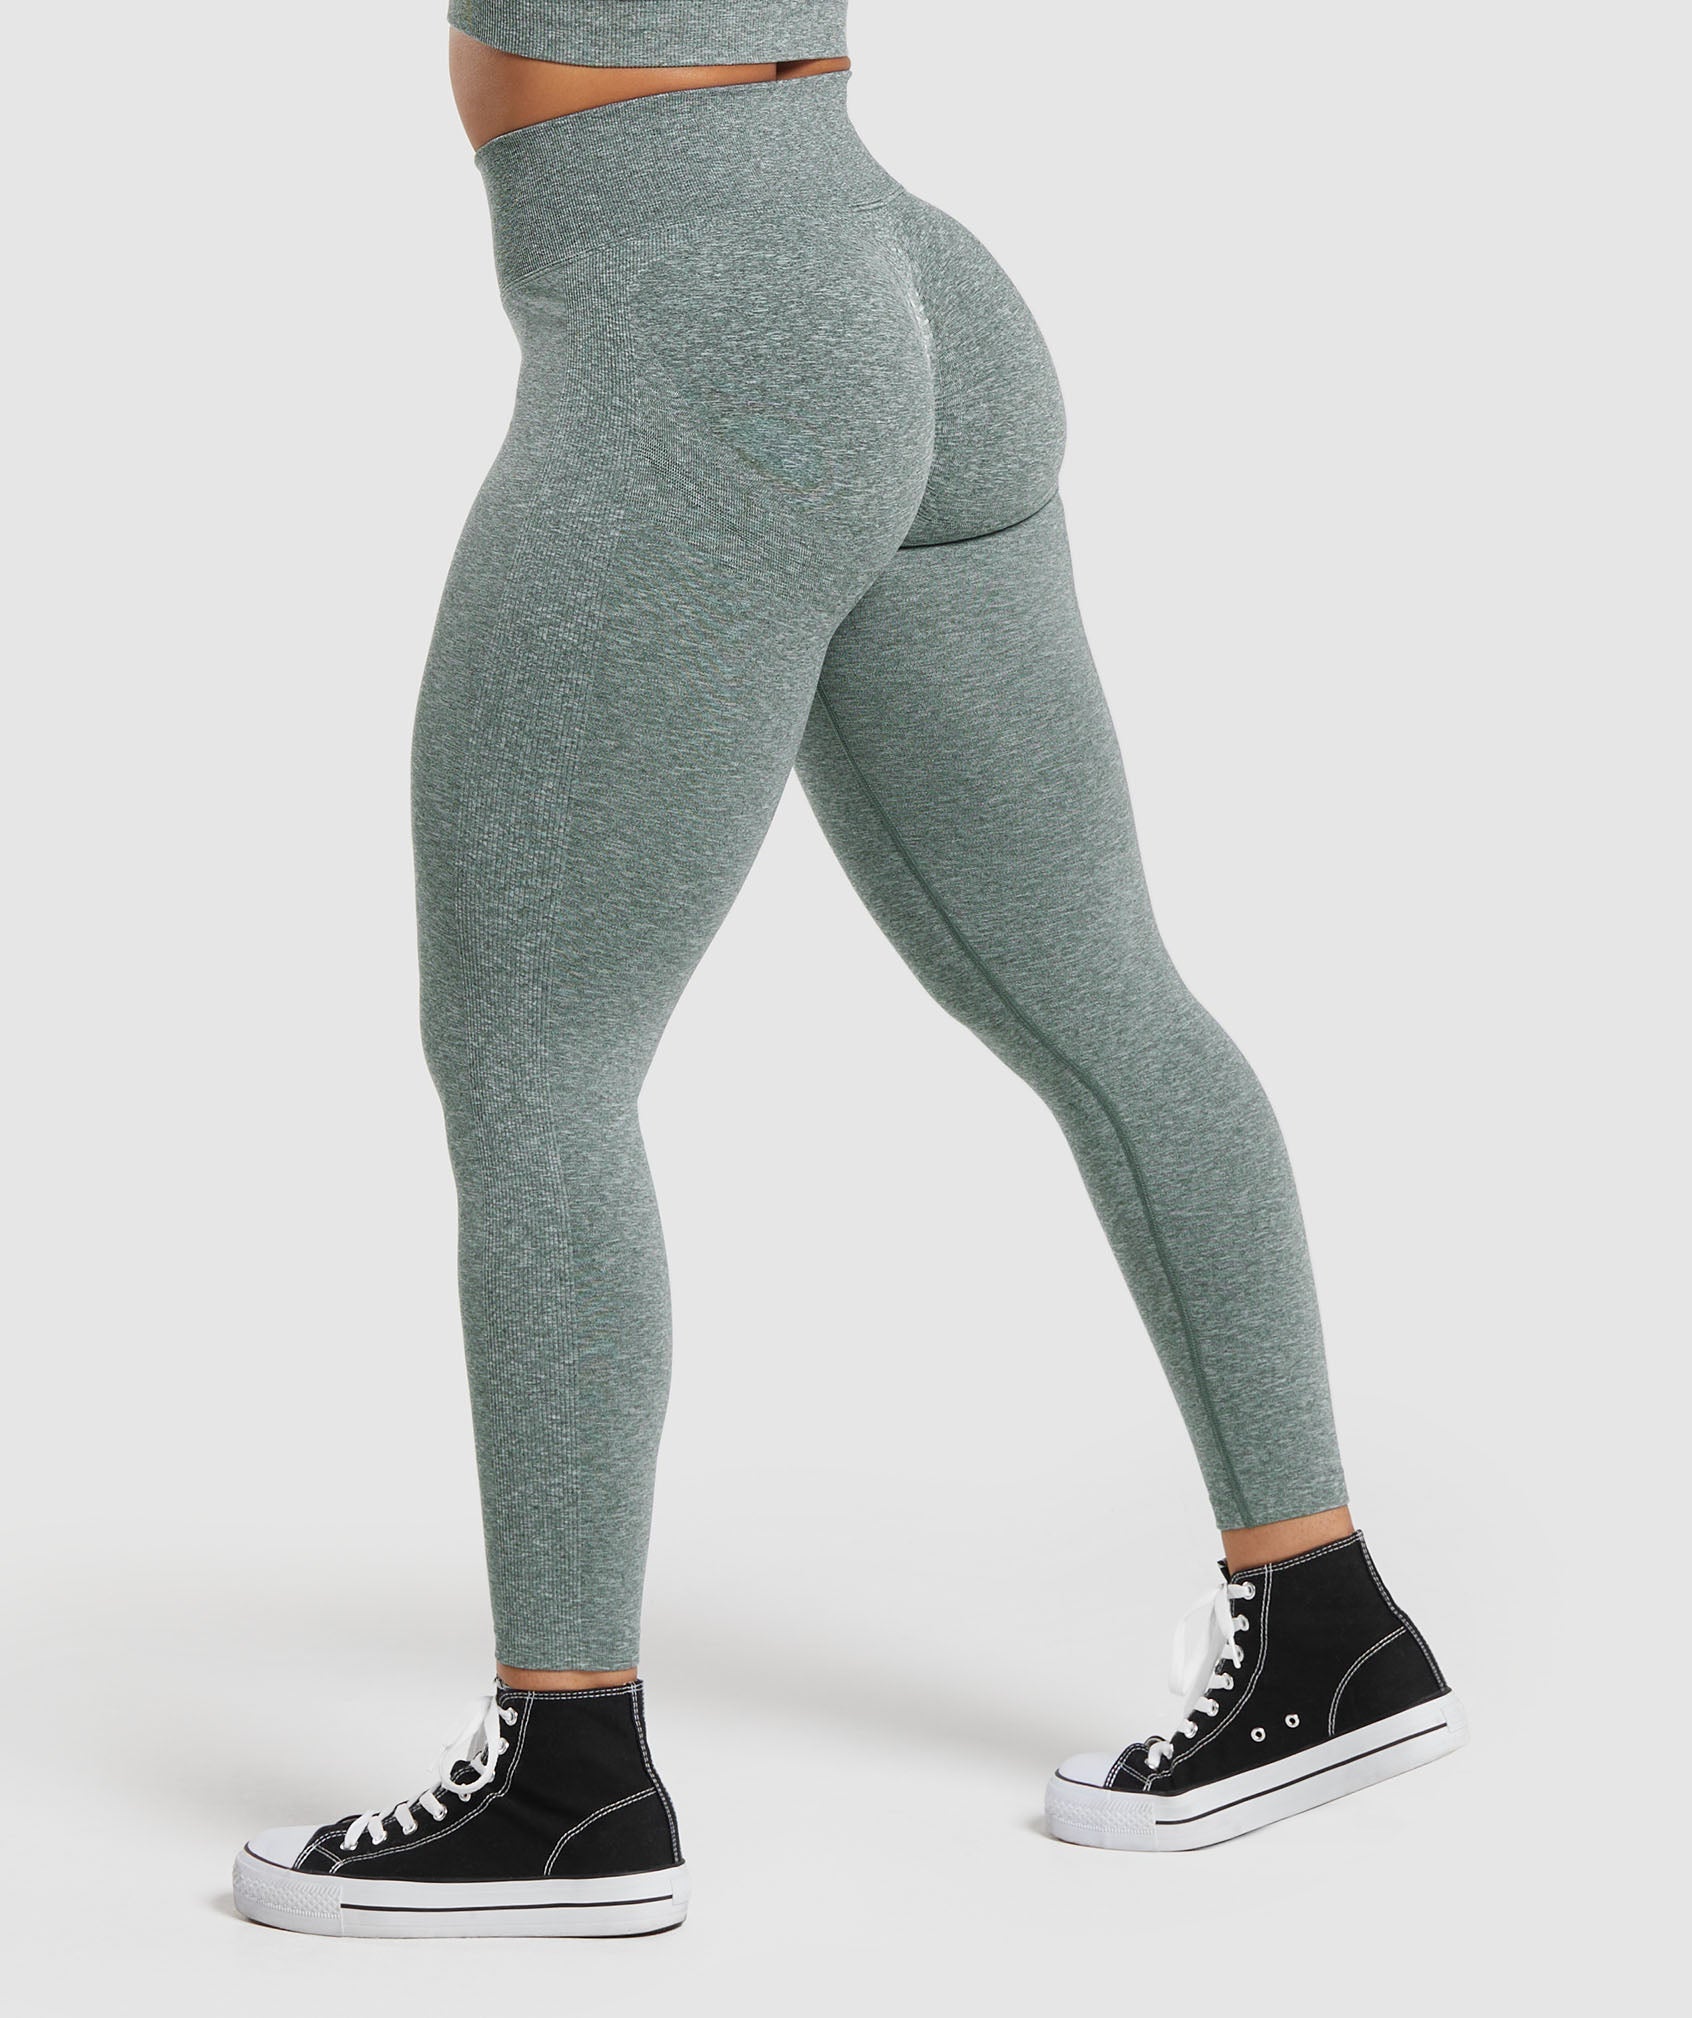 Lift Contour Seamless Leggings in Slate Teal/White Marl - view 5